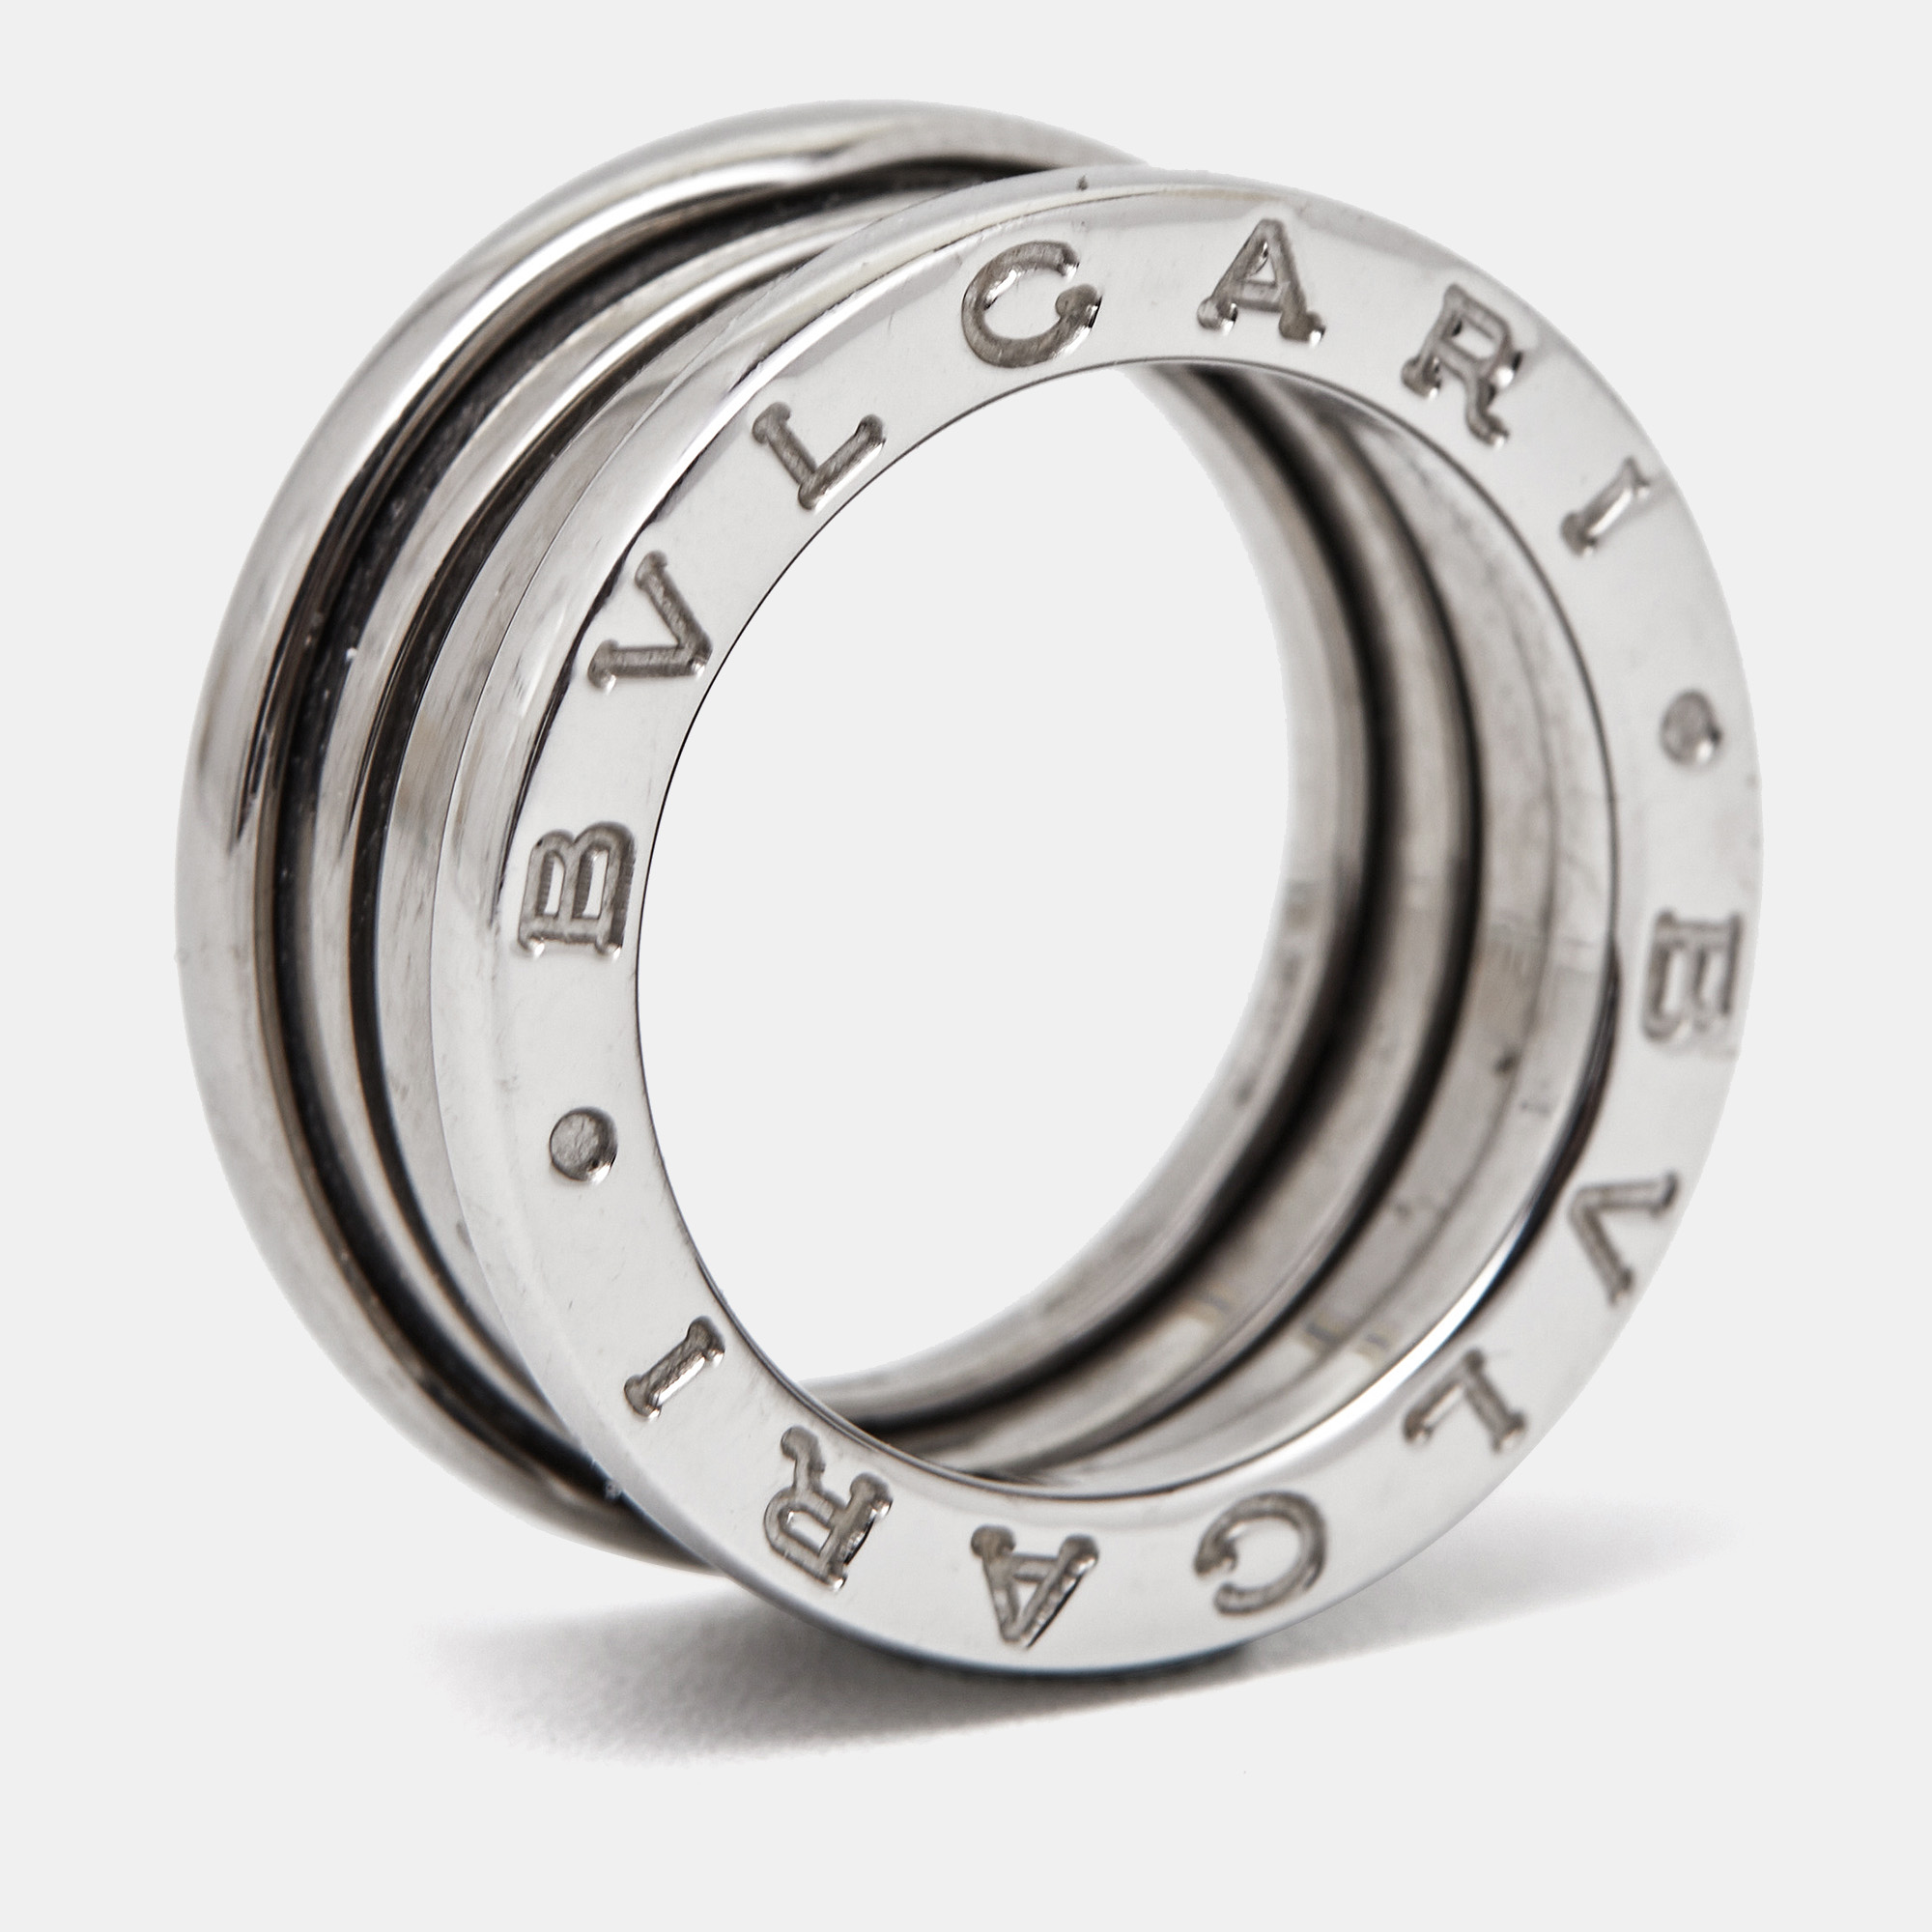 The Bvlgari B. Zero1 ring is a luxurious and iconic piece of jewelry. Crafted from exquisite 18k white gold it features four interlocking bands creating a contemporary and bold design. This timeless ring seamlessly combines elegance and modernity making it a coveted accessory for any fashion forward individual.